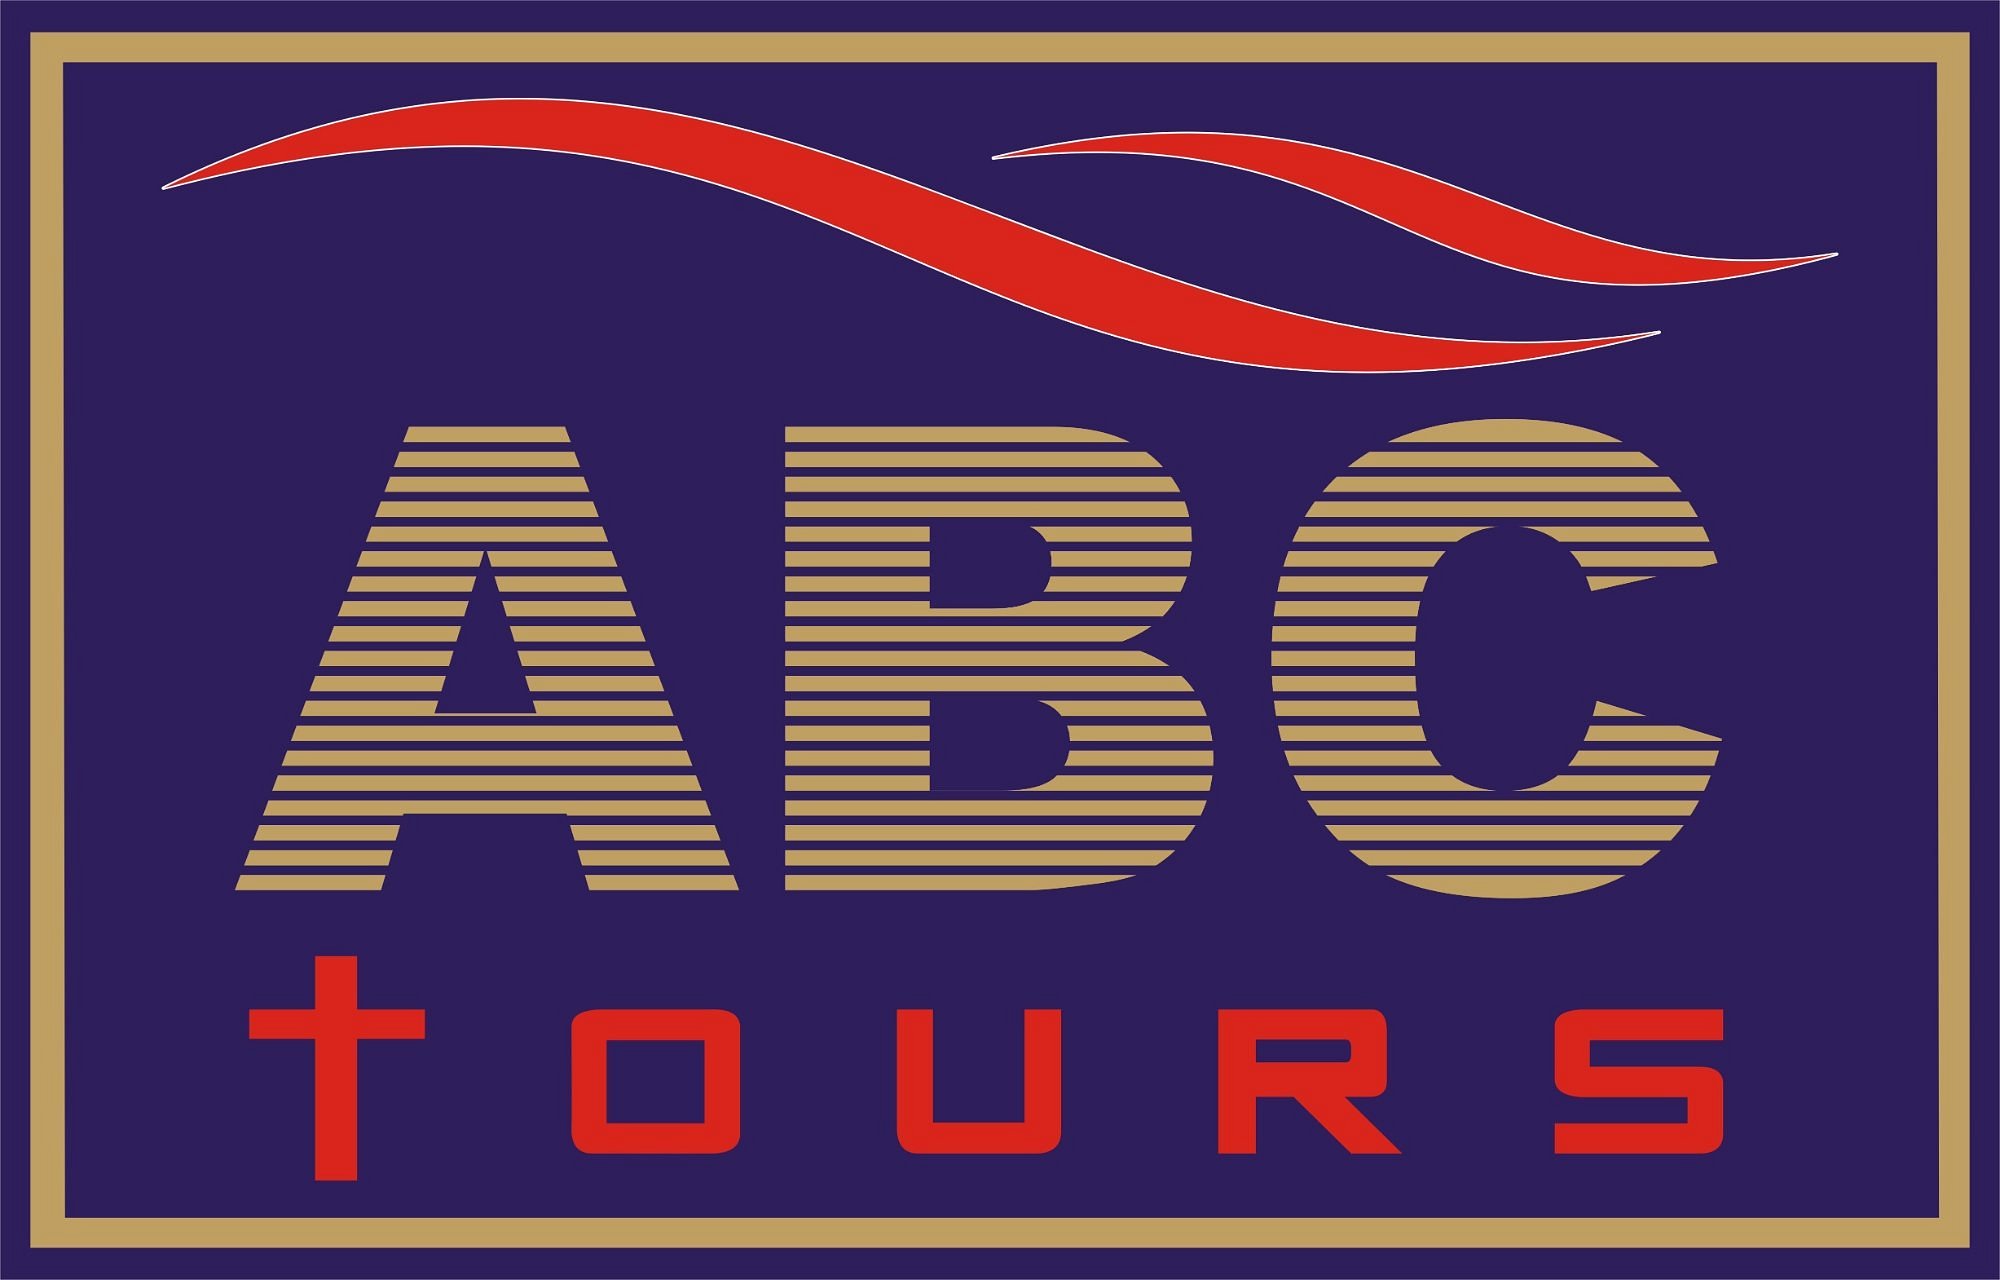 abc travel and tours